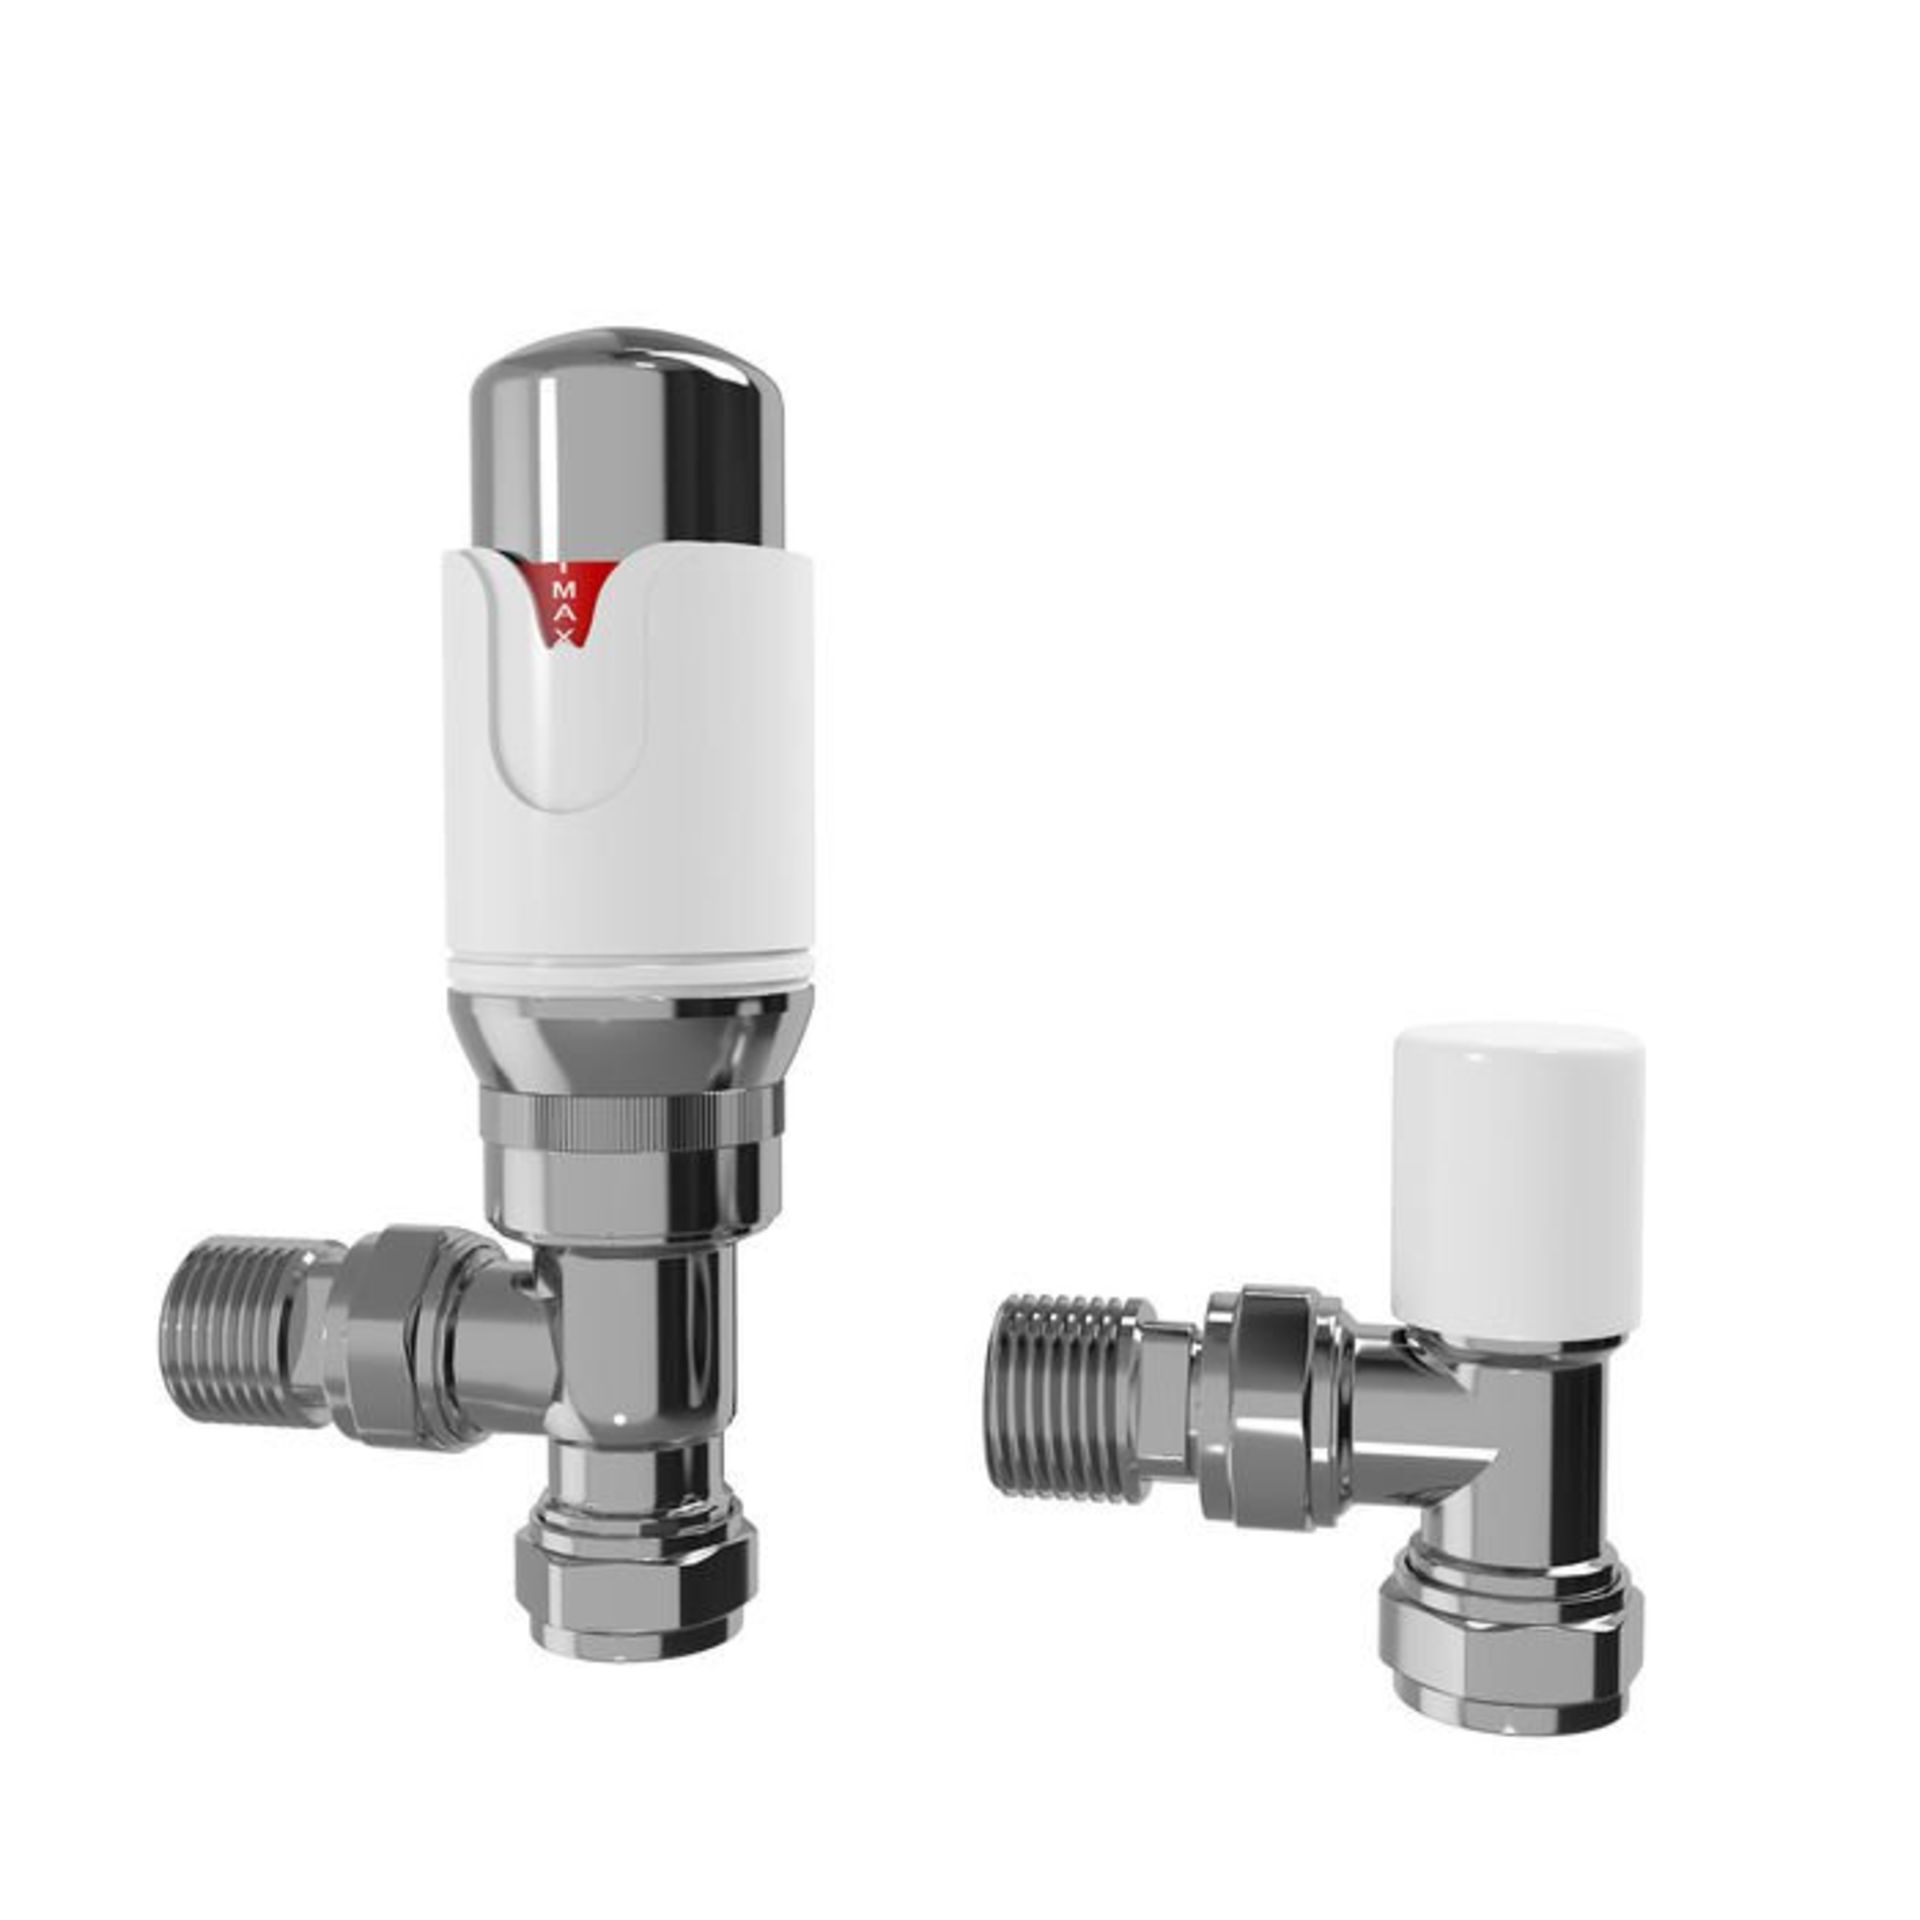 (L127) 15mm Standard Connection Thermostatic Angled Gloss White & Chrome Radiator Valves. Solid